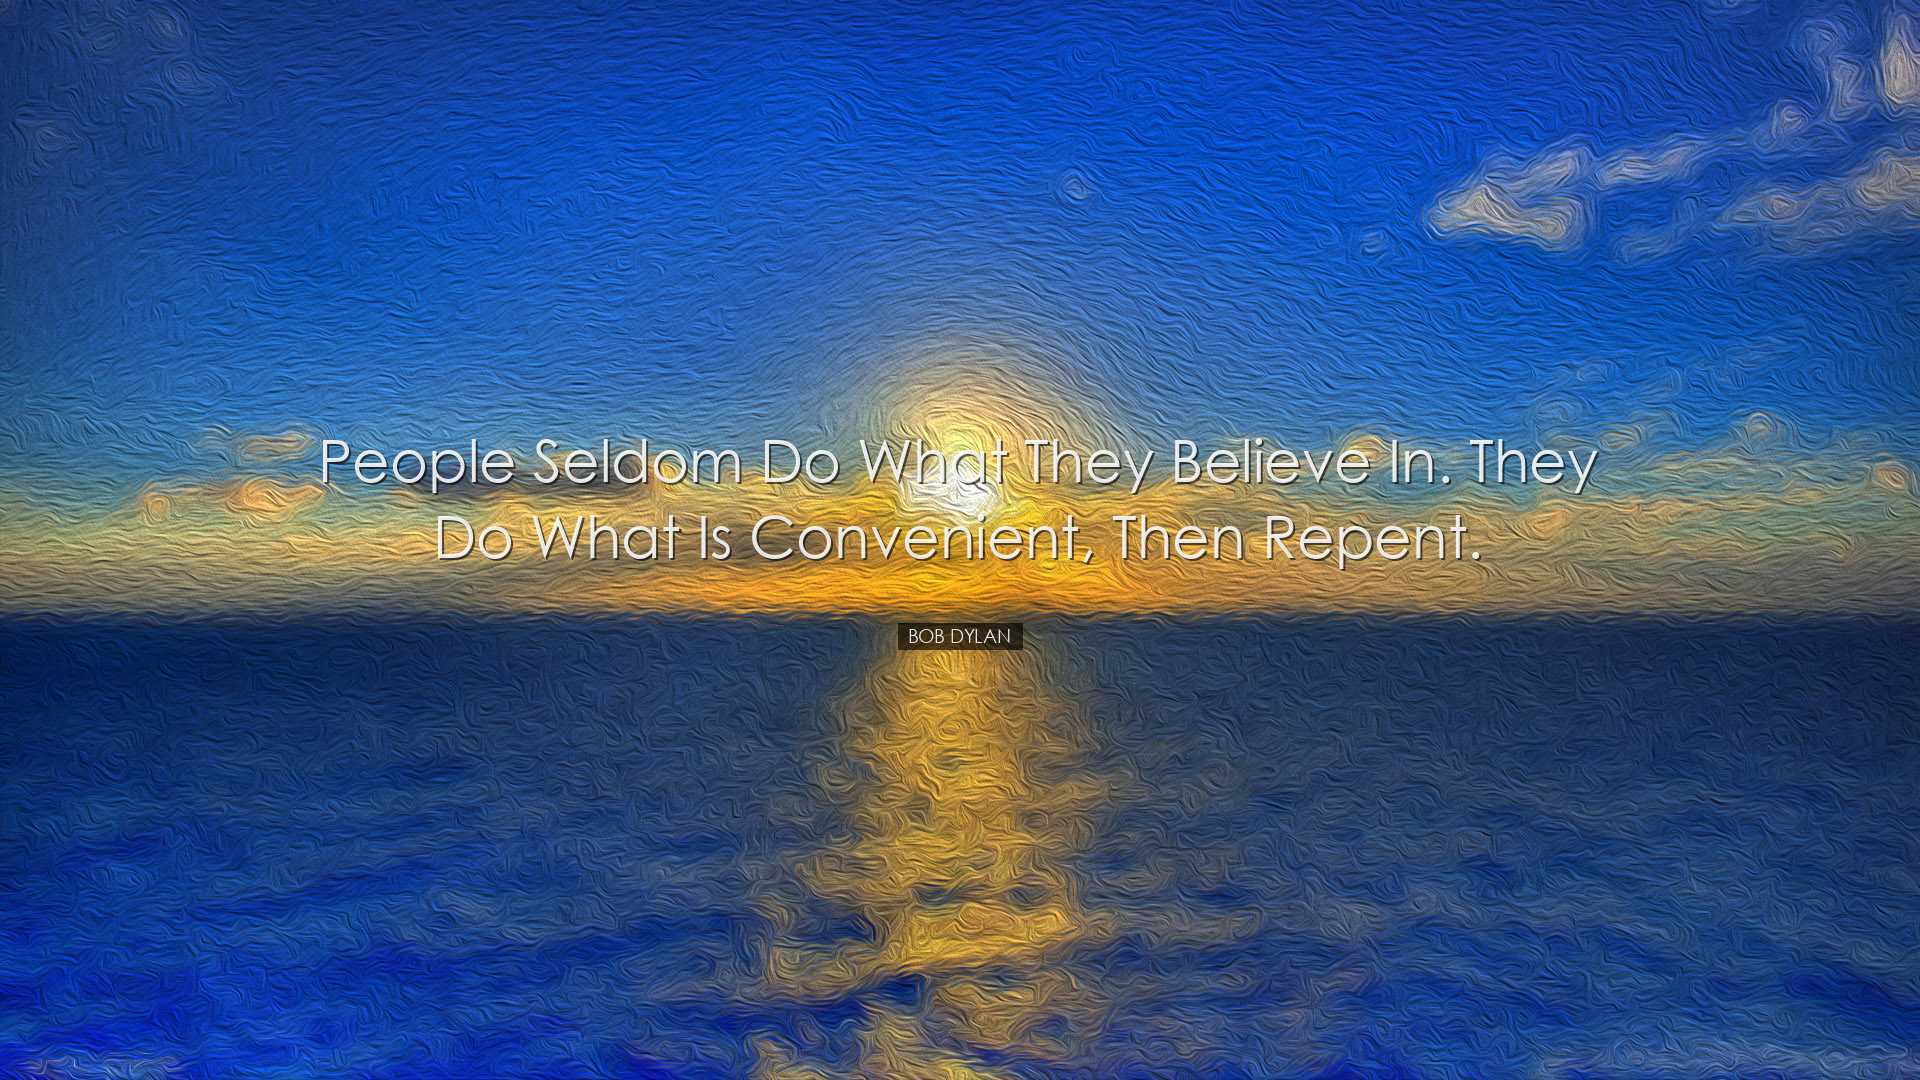 People seldom do what they believe in. They do what is convenient,